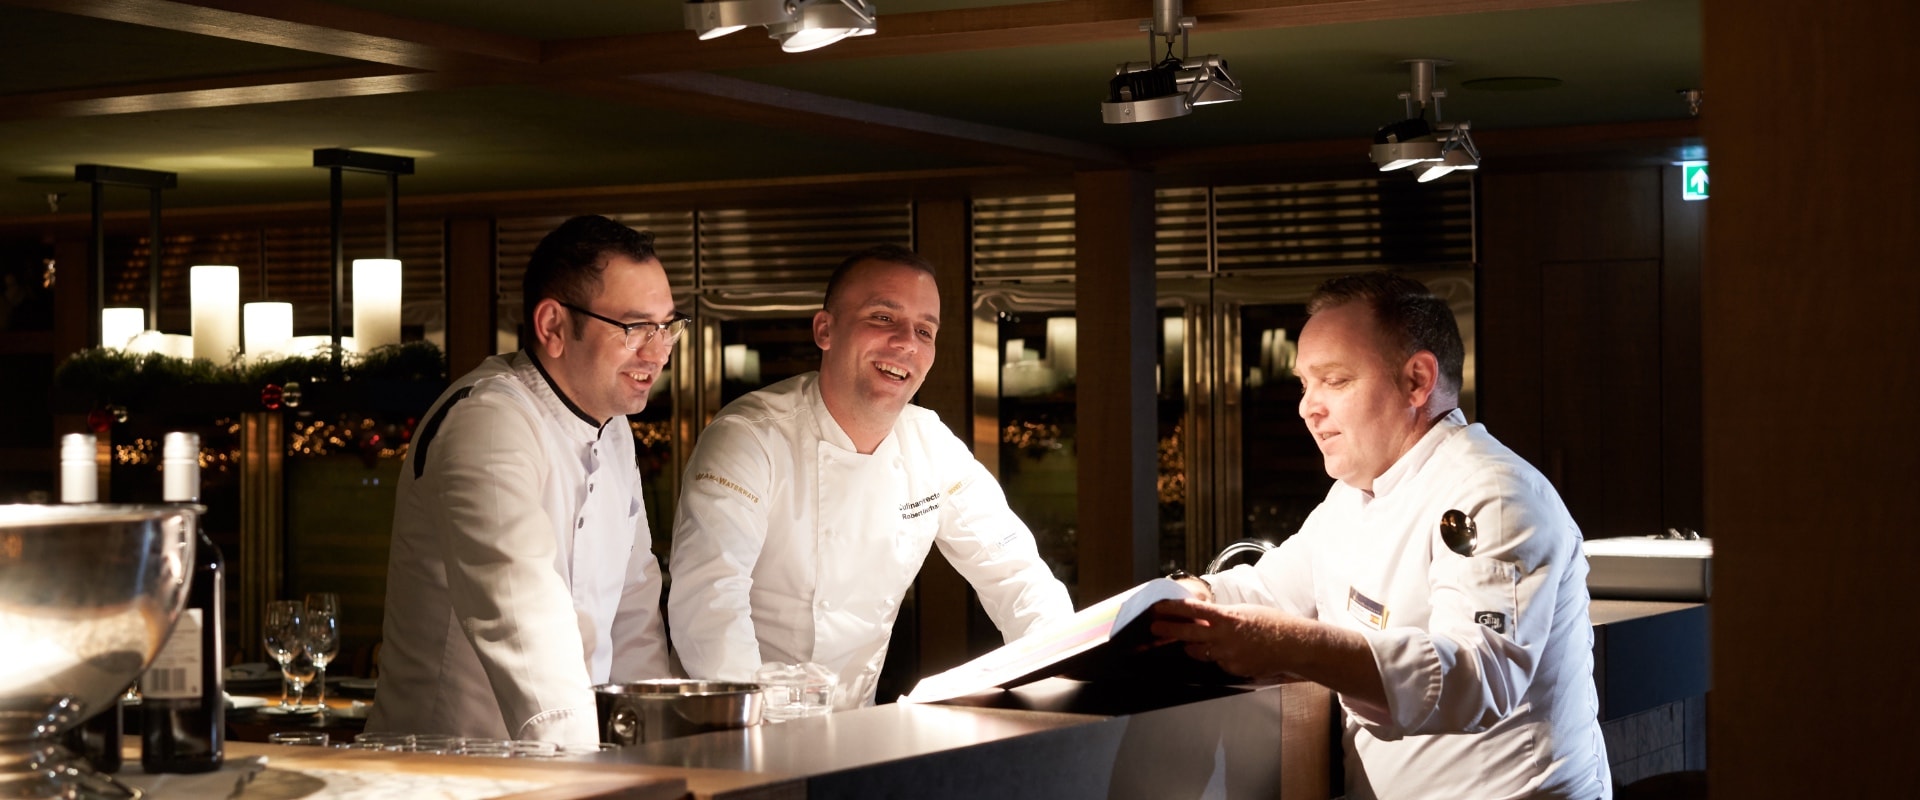 robert kellerhals erc executive chef laughing with staff in ship galley, europe 12 5